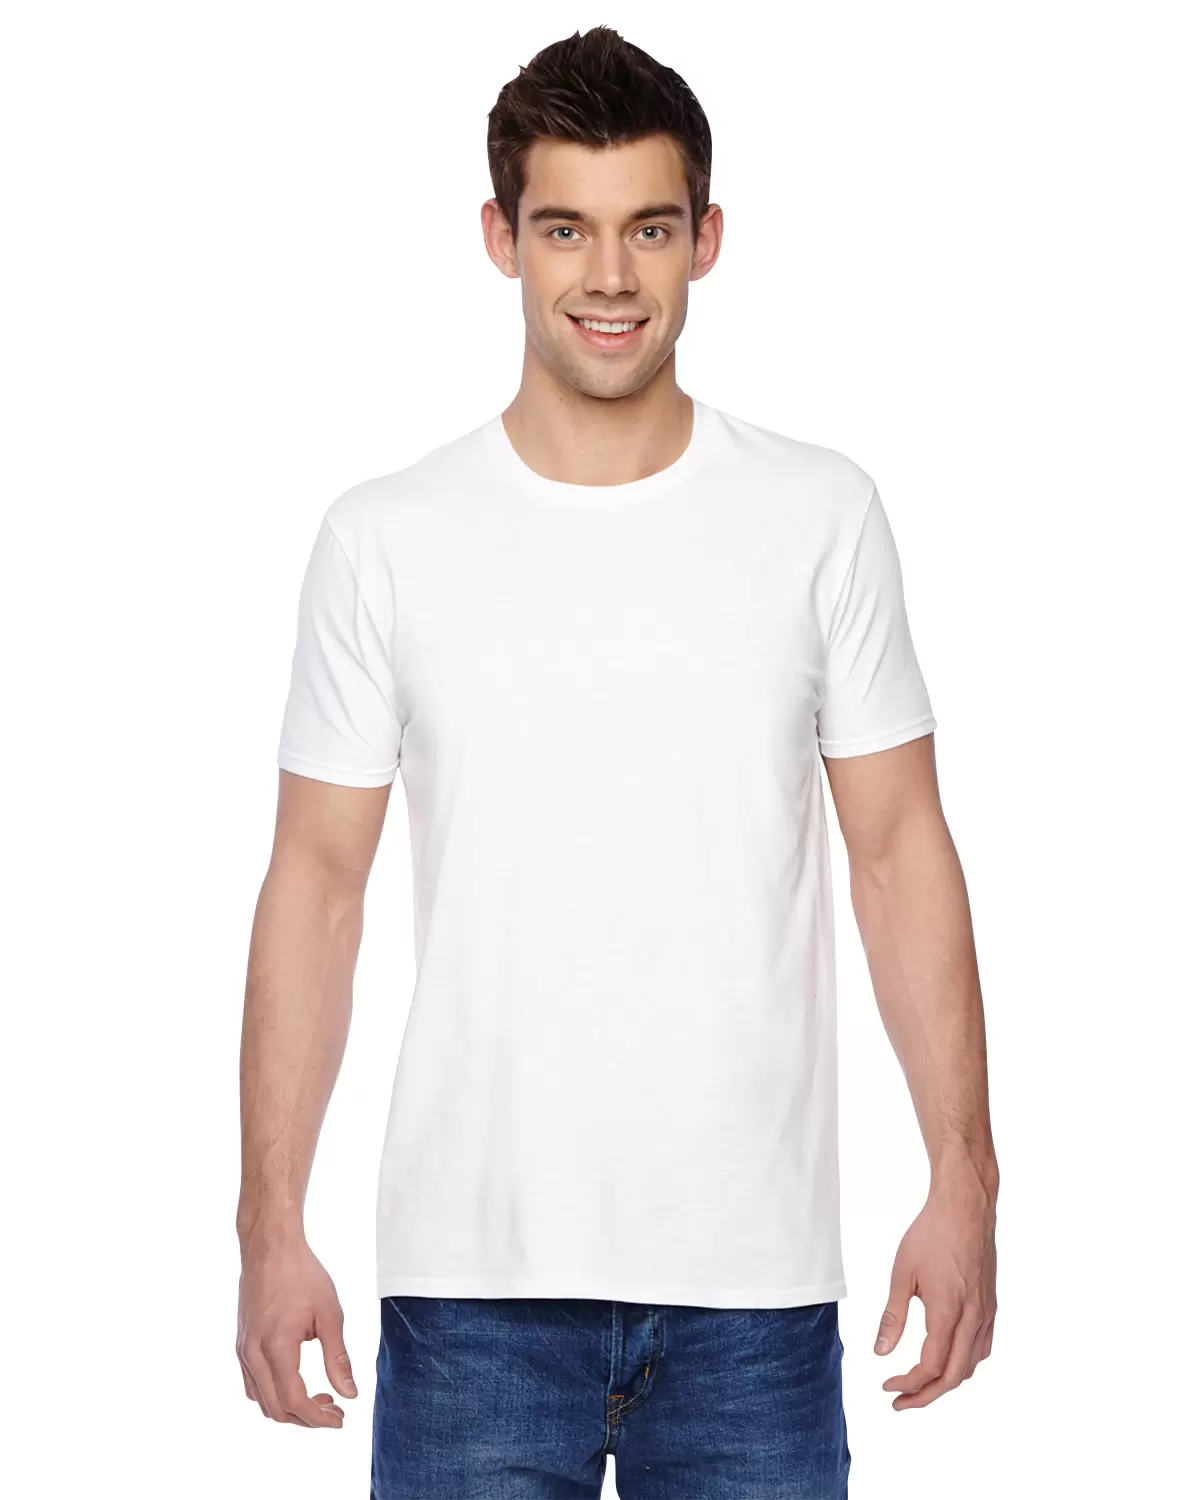 SF45 Fruit of the Loom Adult Sofspun™ T-Shirt - From $3.55